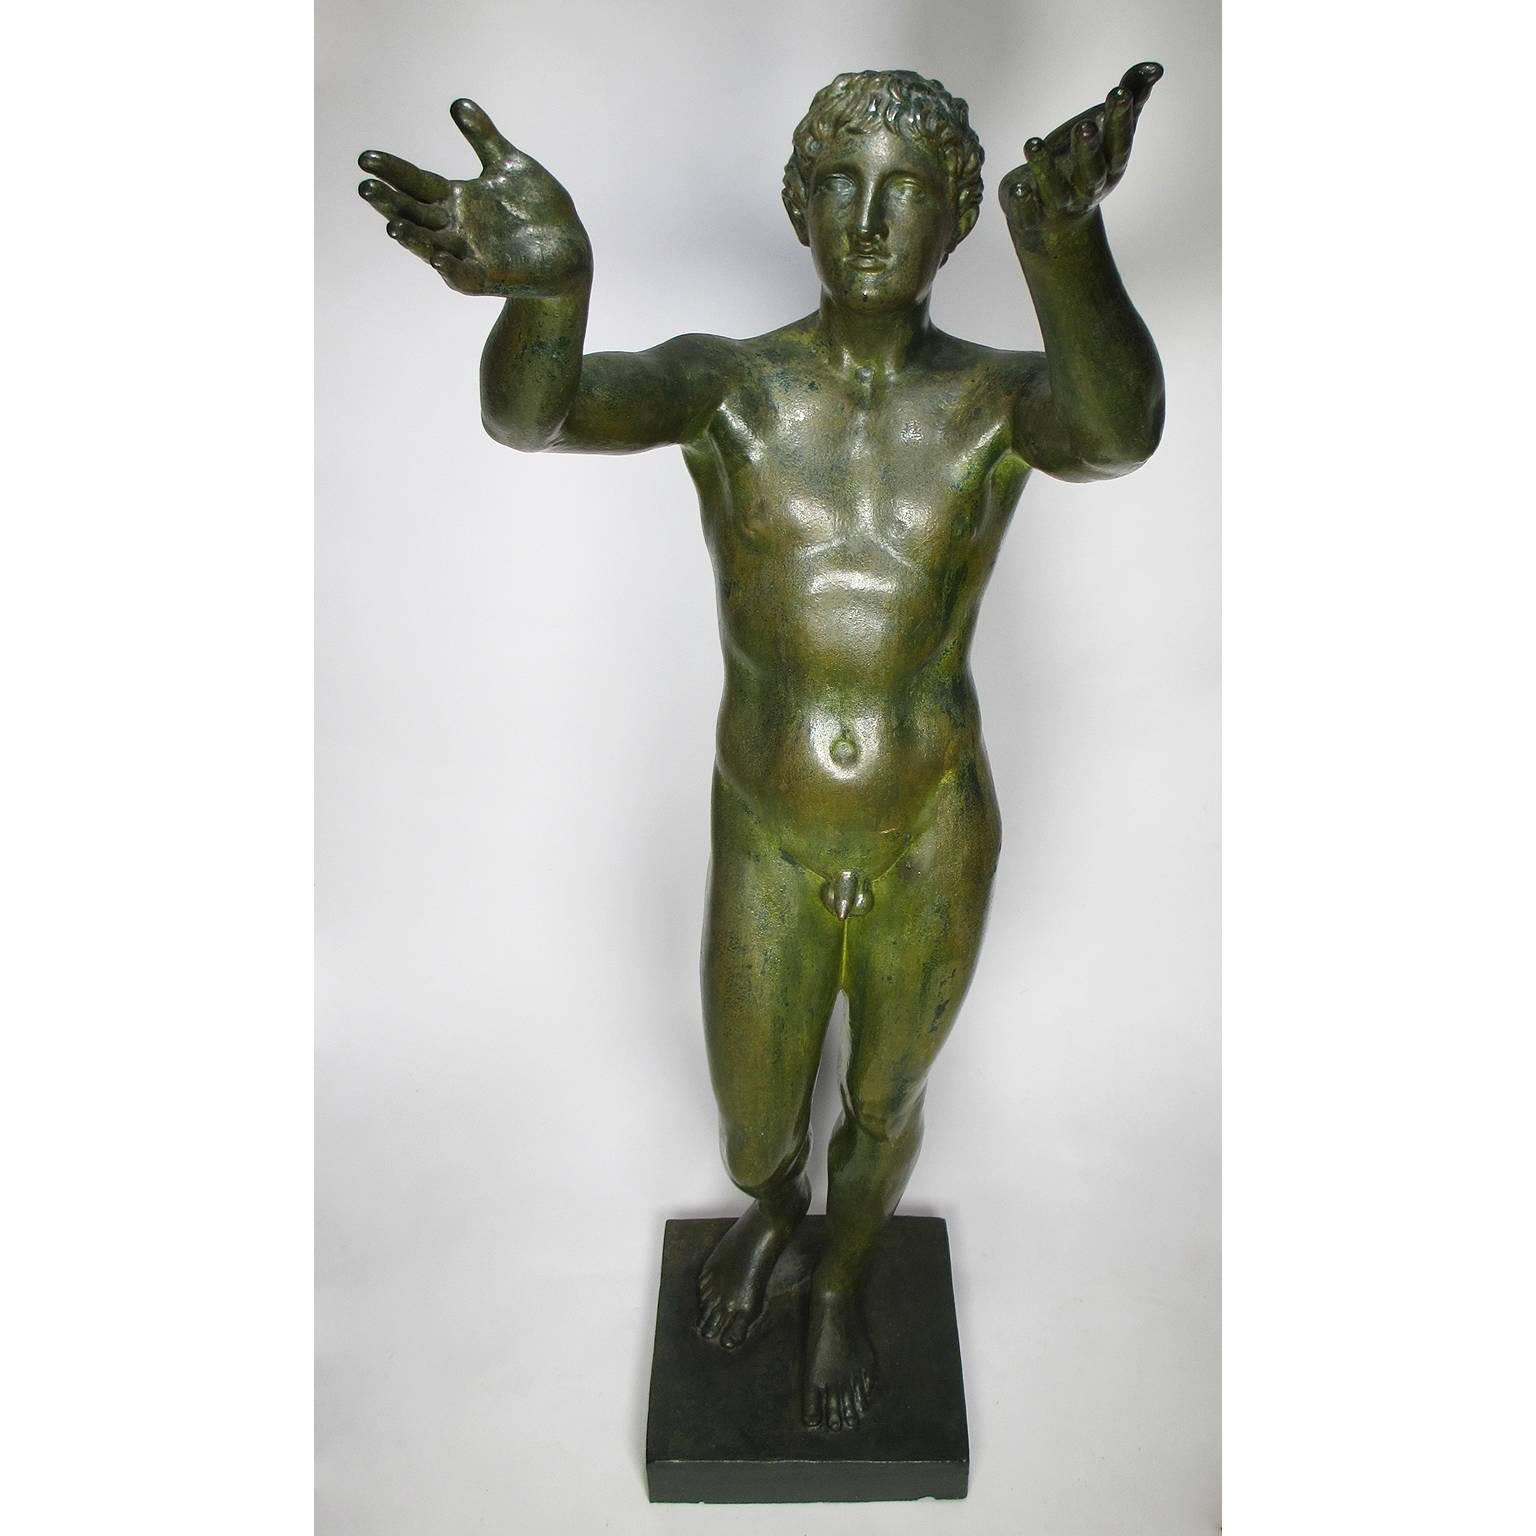 A fine pair of neoclassical Greco Roman style 19th century cast-iron figures of 